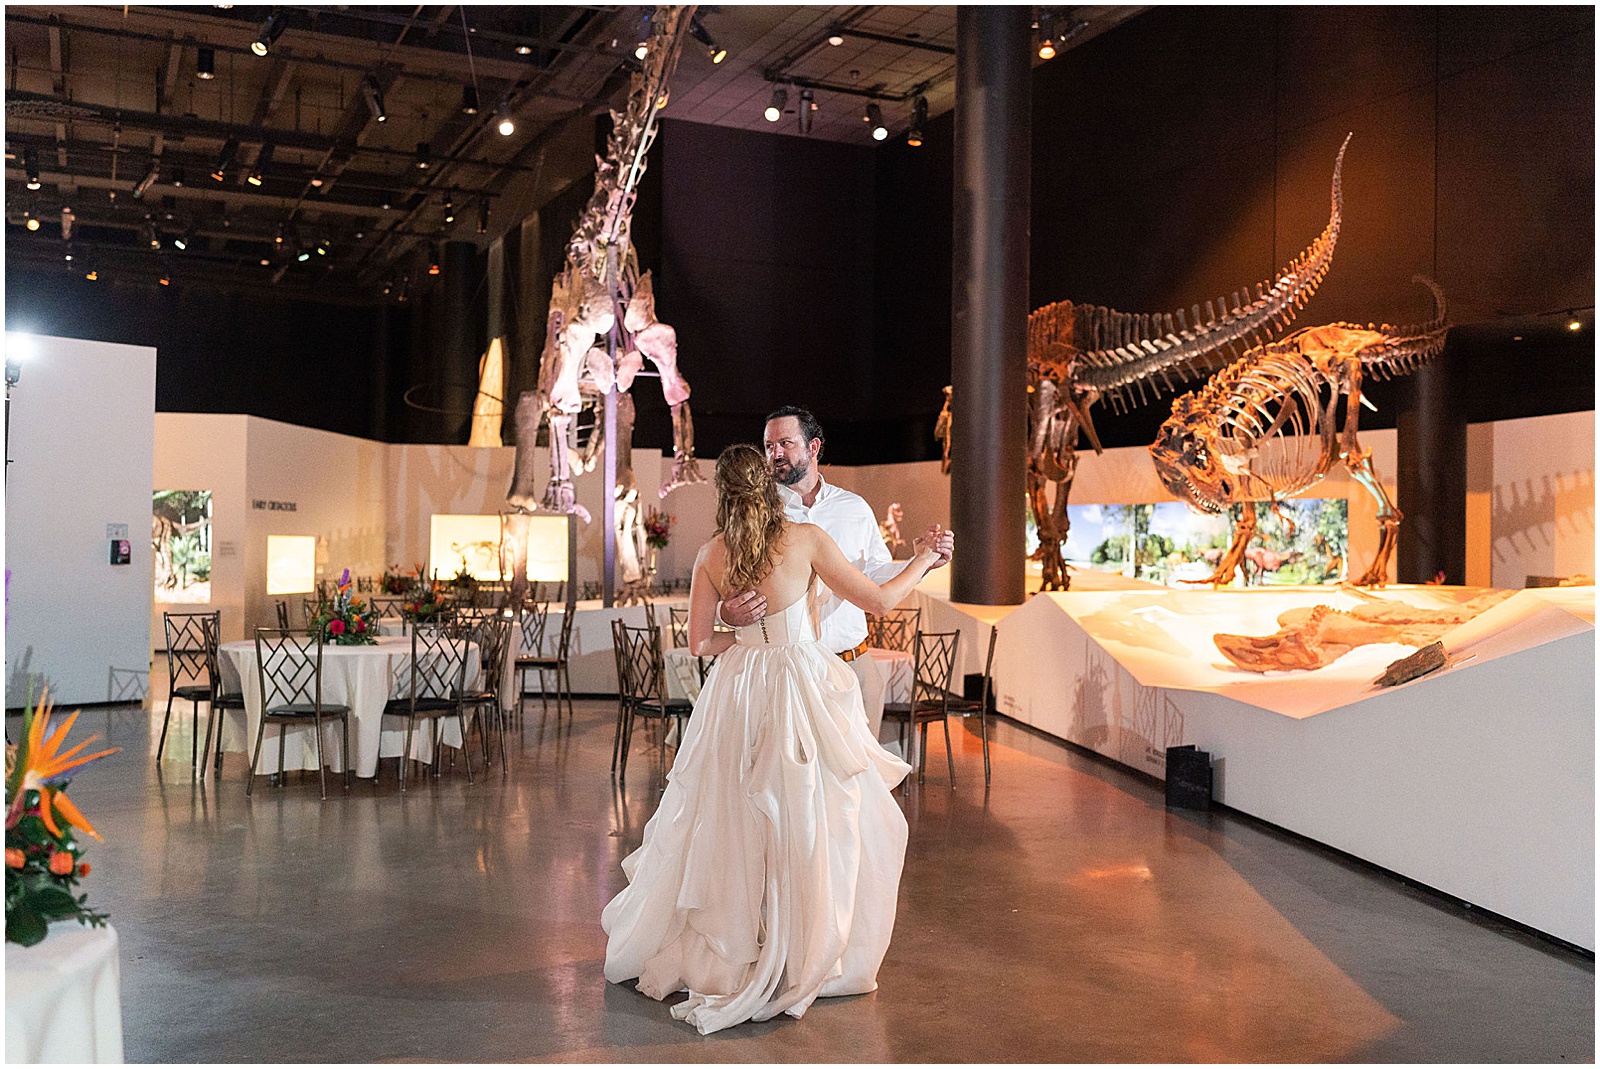 Private Last Dance with Dinosaurs at Houston Museum of Natural Science Wedding Reception | Swish and Click Photography